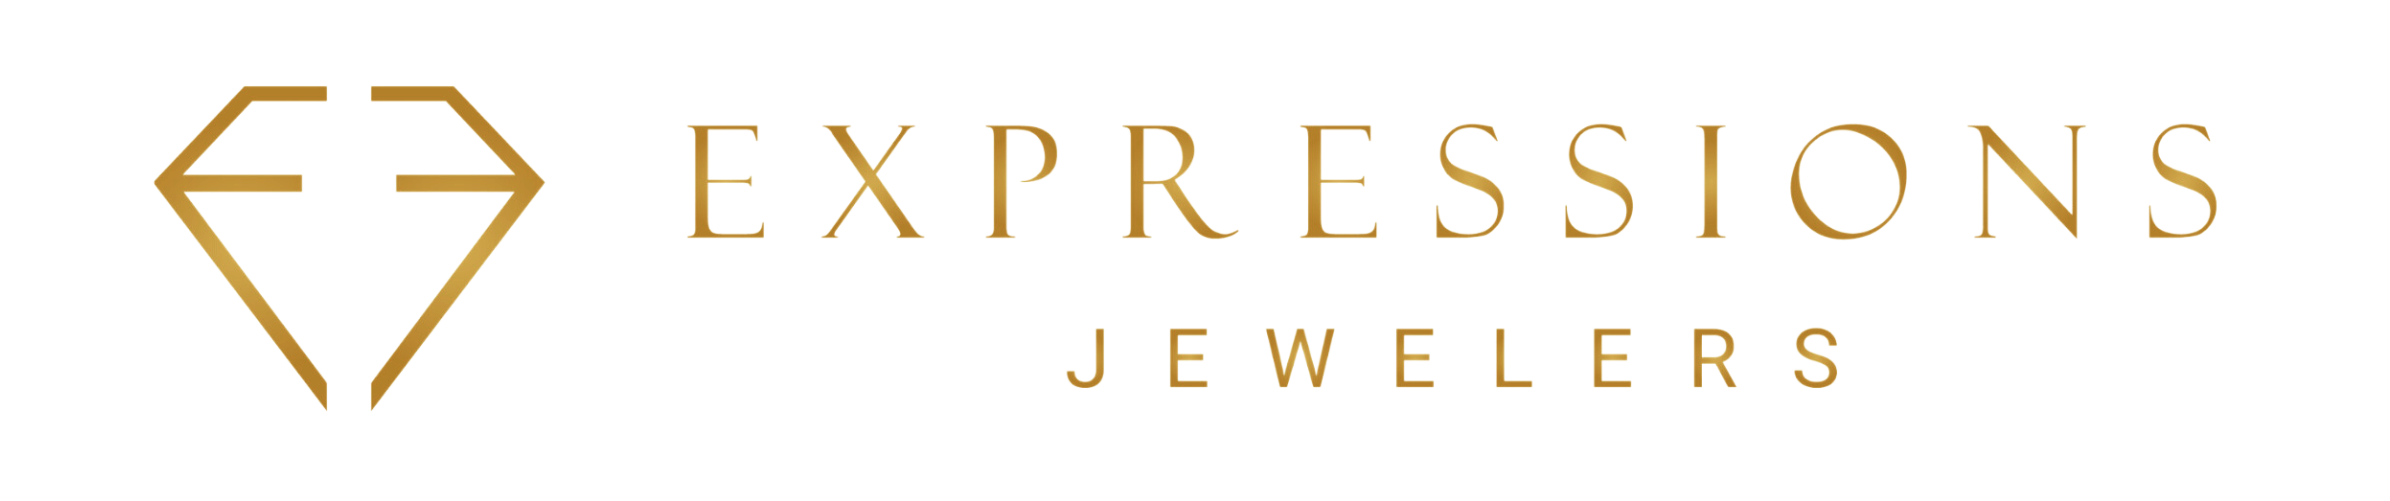 Expression Jewelers